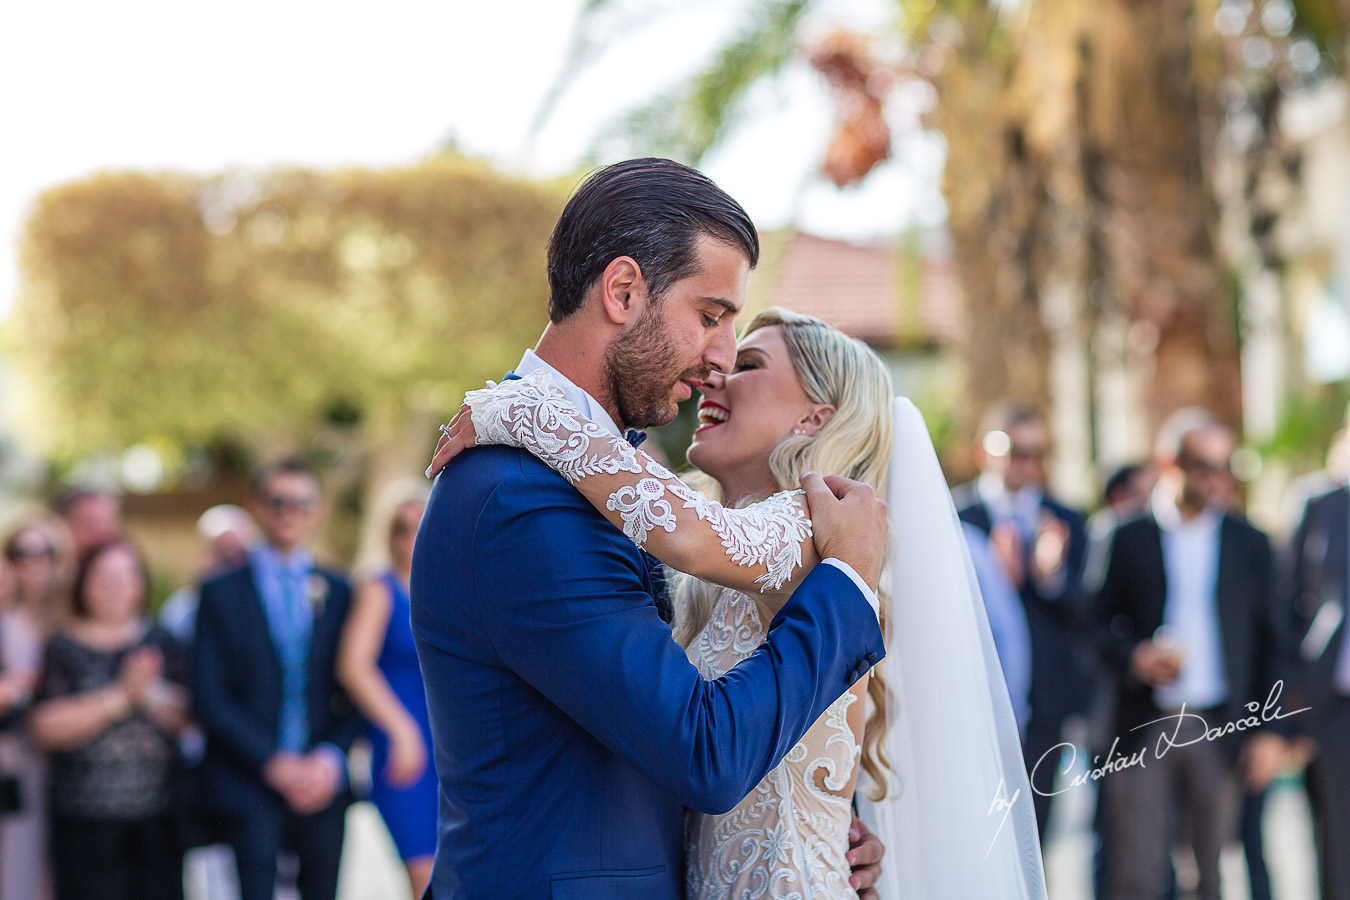 Moments before the church ceremony captured at an elegant and romantic wedding at Elias Beach Hotel by Cristian Dascalu.